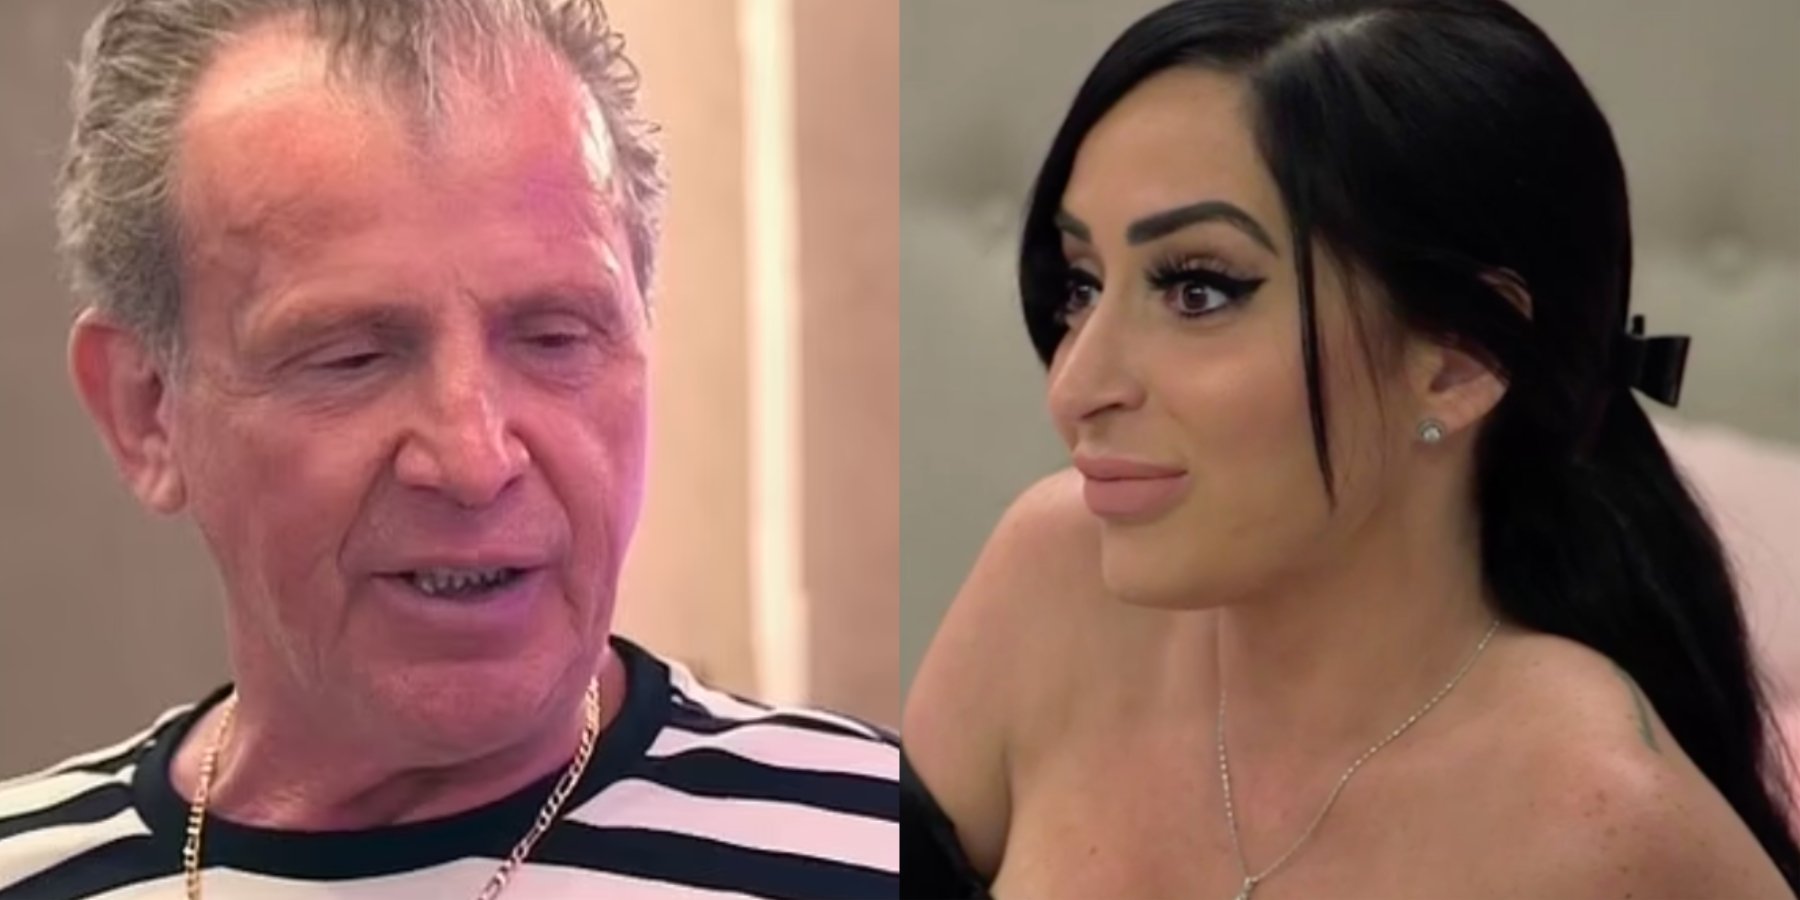 'Jersey Shore: Family Vacation' season 5 featured a touching heart-to-heart between Uncle Nino Giaimo and Angelina Pivarnick.